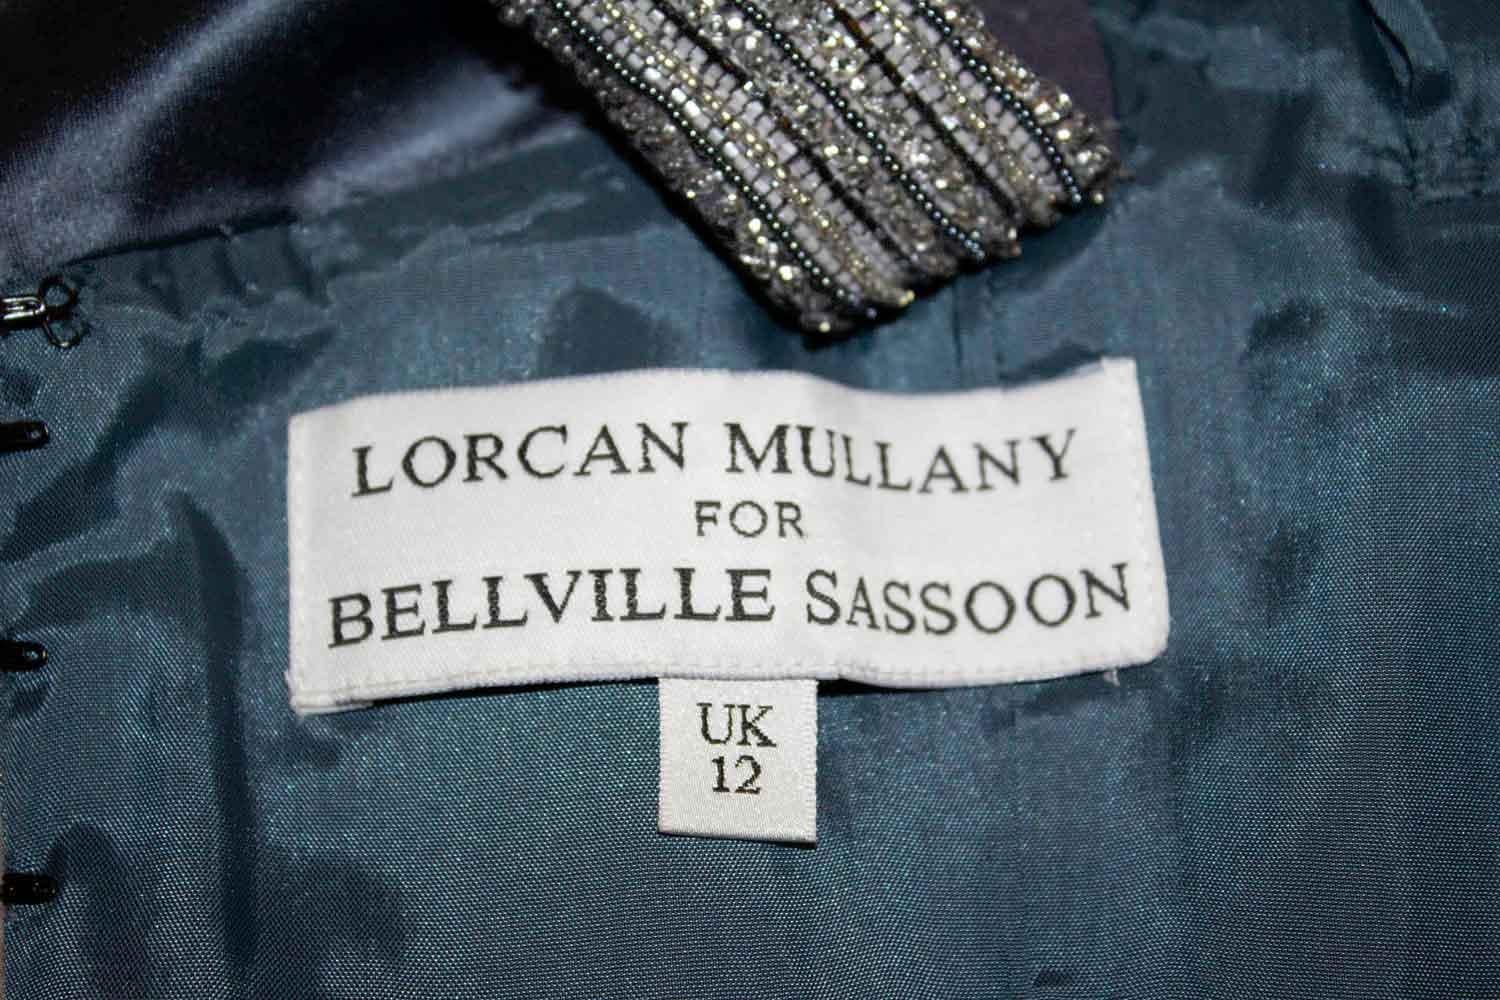 A headturning vintage gown by Lorcan Mullany for Bellvill Sassoon. In a pretty steel grey silk, the dress has a rouched front with diamante detail, a built in bra/bodice  - that could be removed . There is detail on the straps and the dress is fully